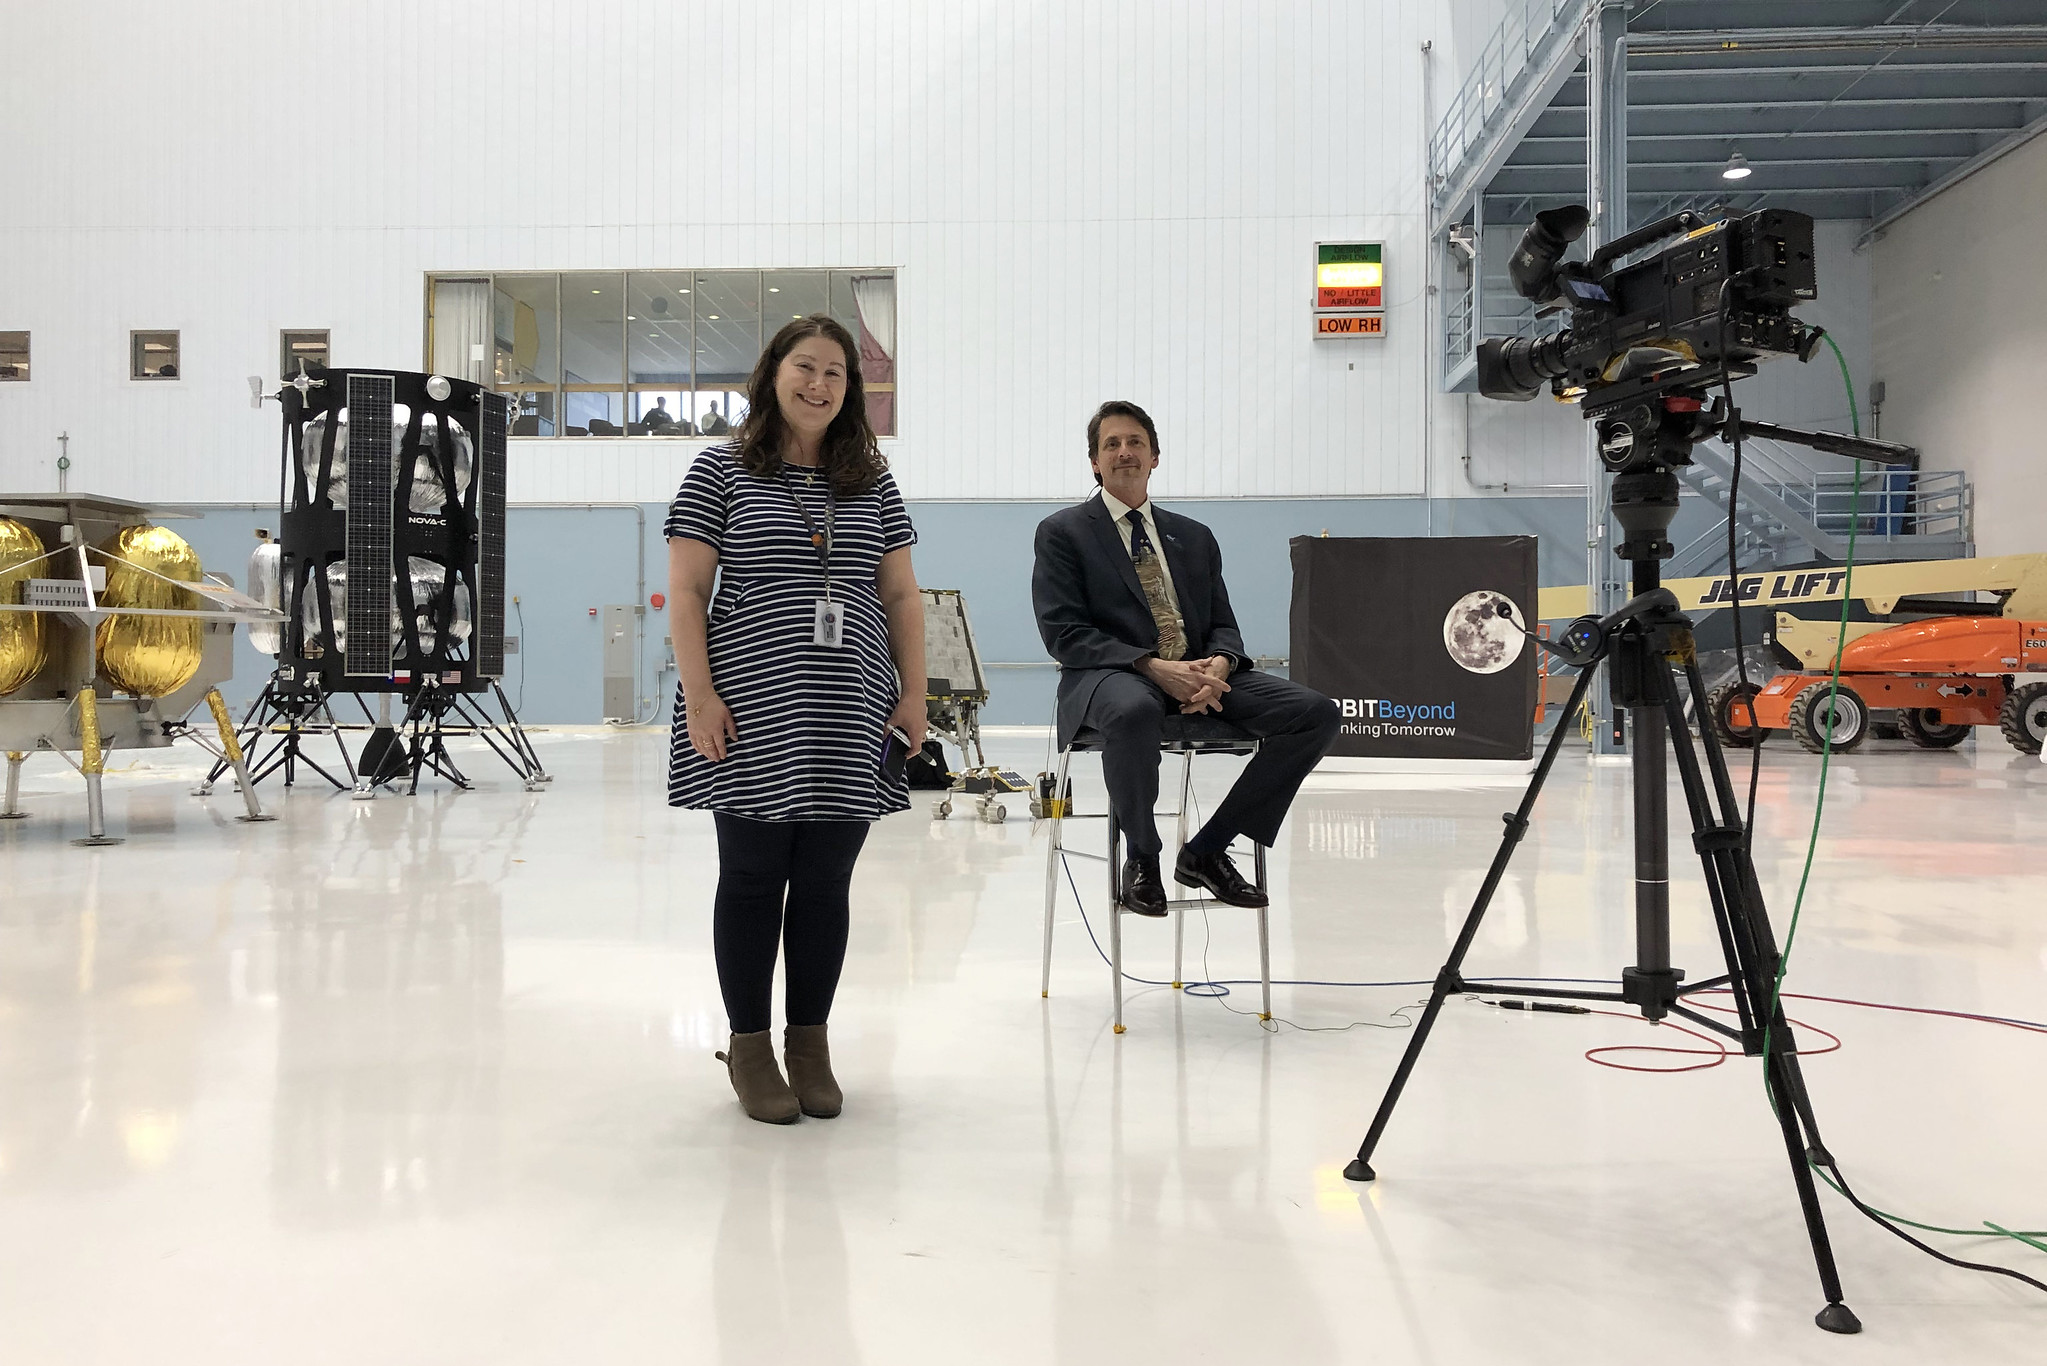 Handleman in a behind the scene pic from the Artemis Commercial Moon Landing Services Program held at Goddard on May 31, 2019.